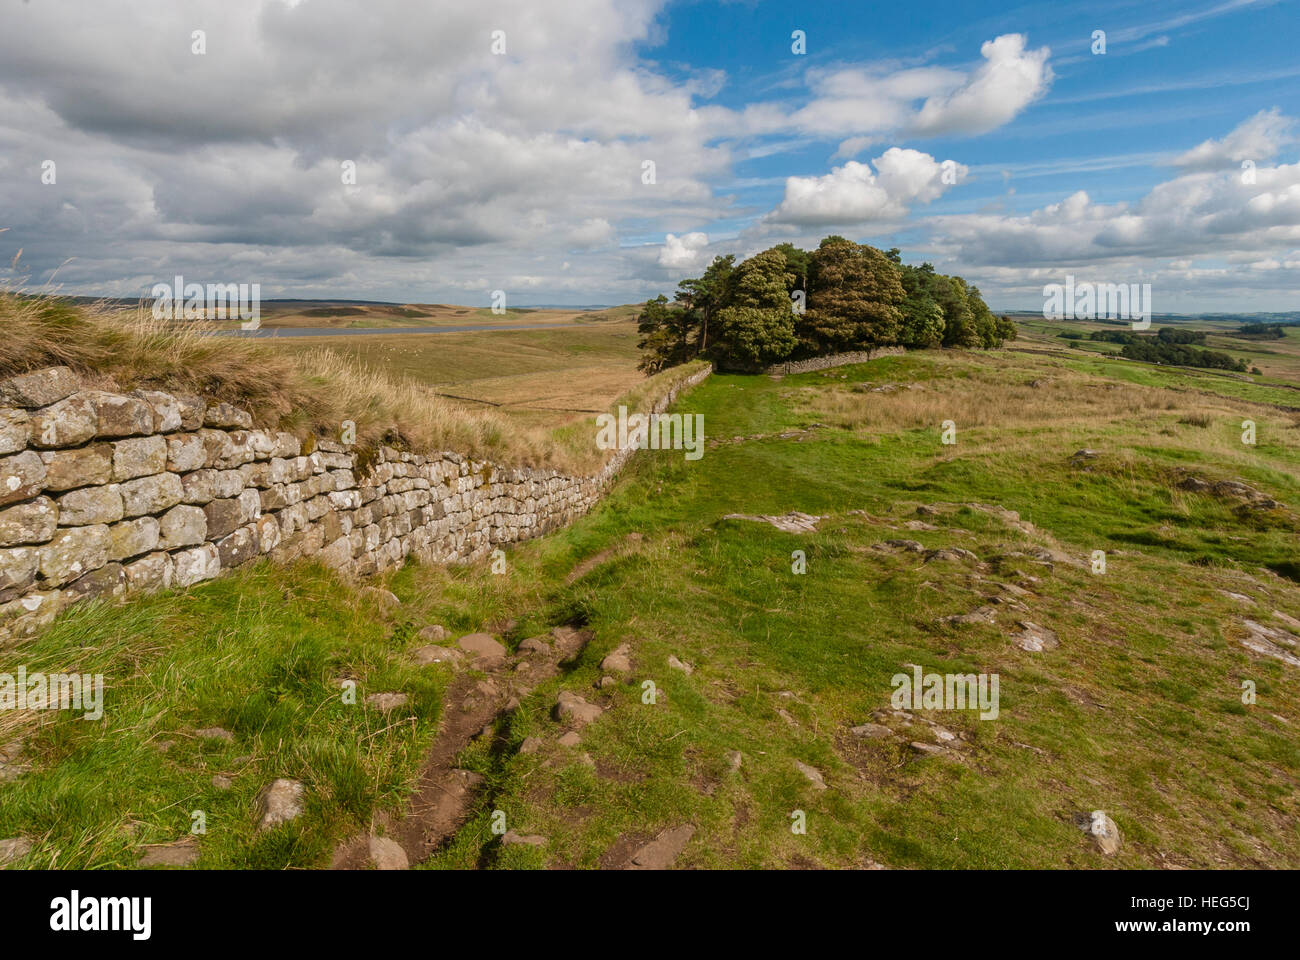 Hadrian's Wall in Northern England. Stock Photo